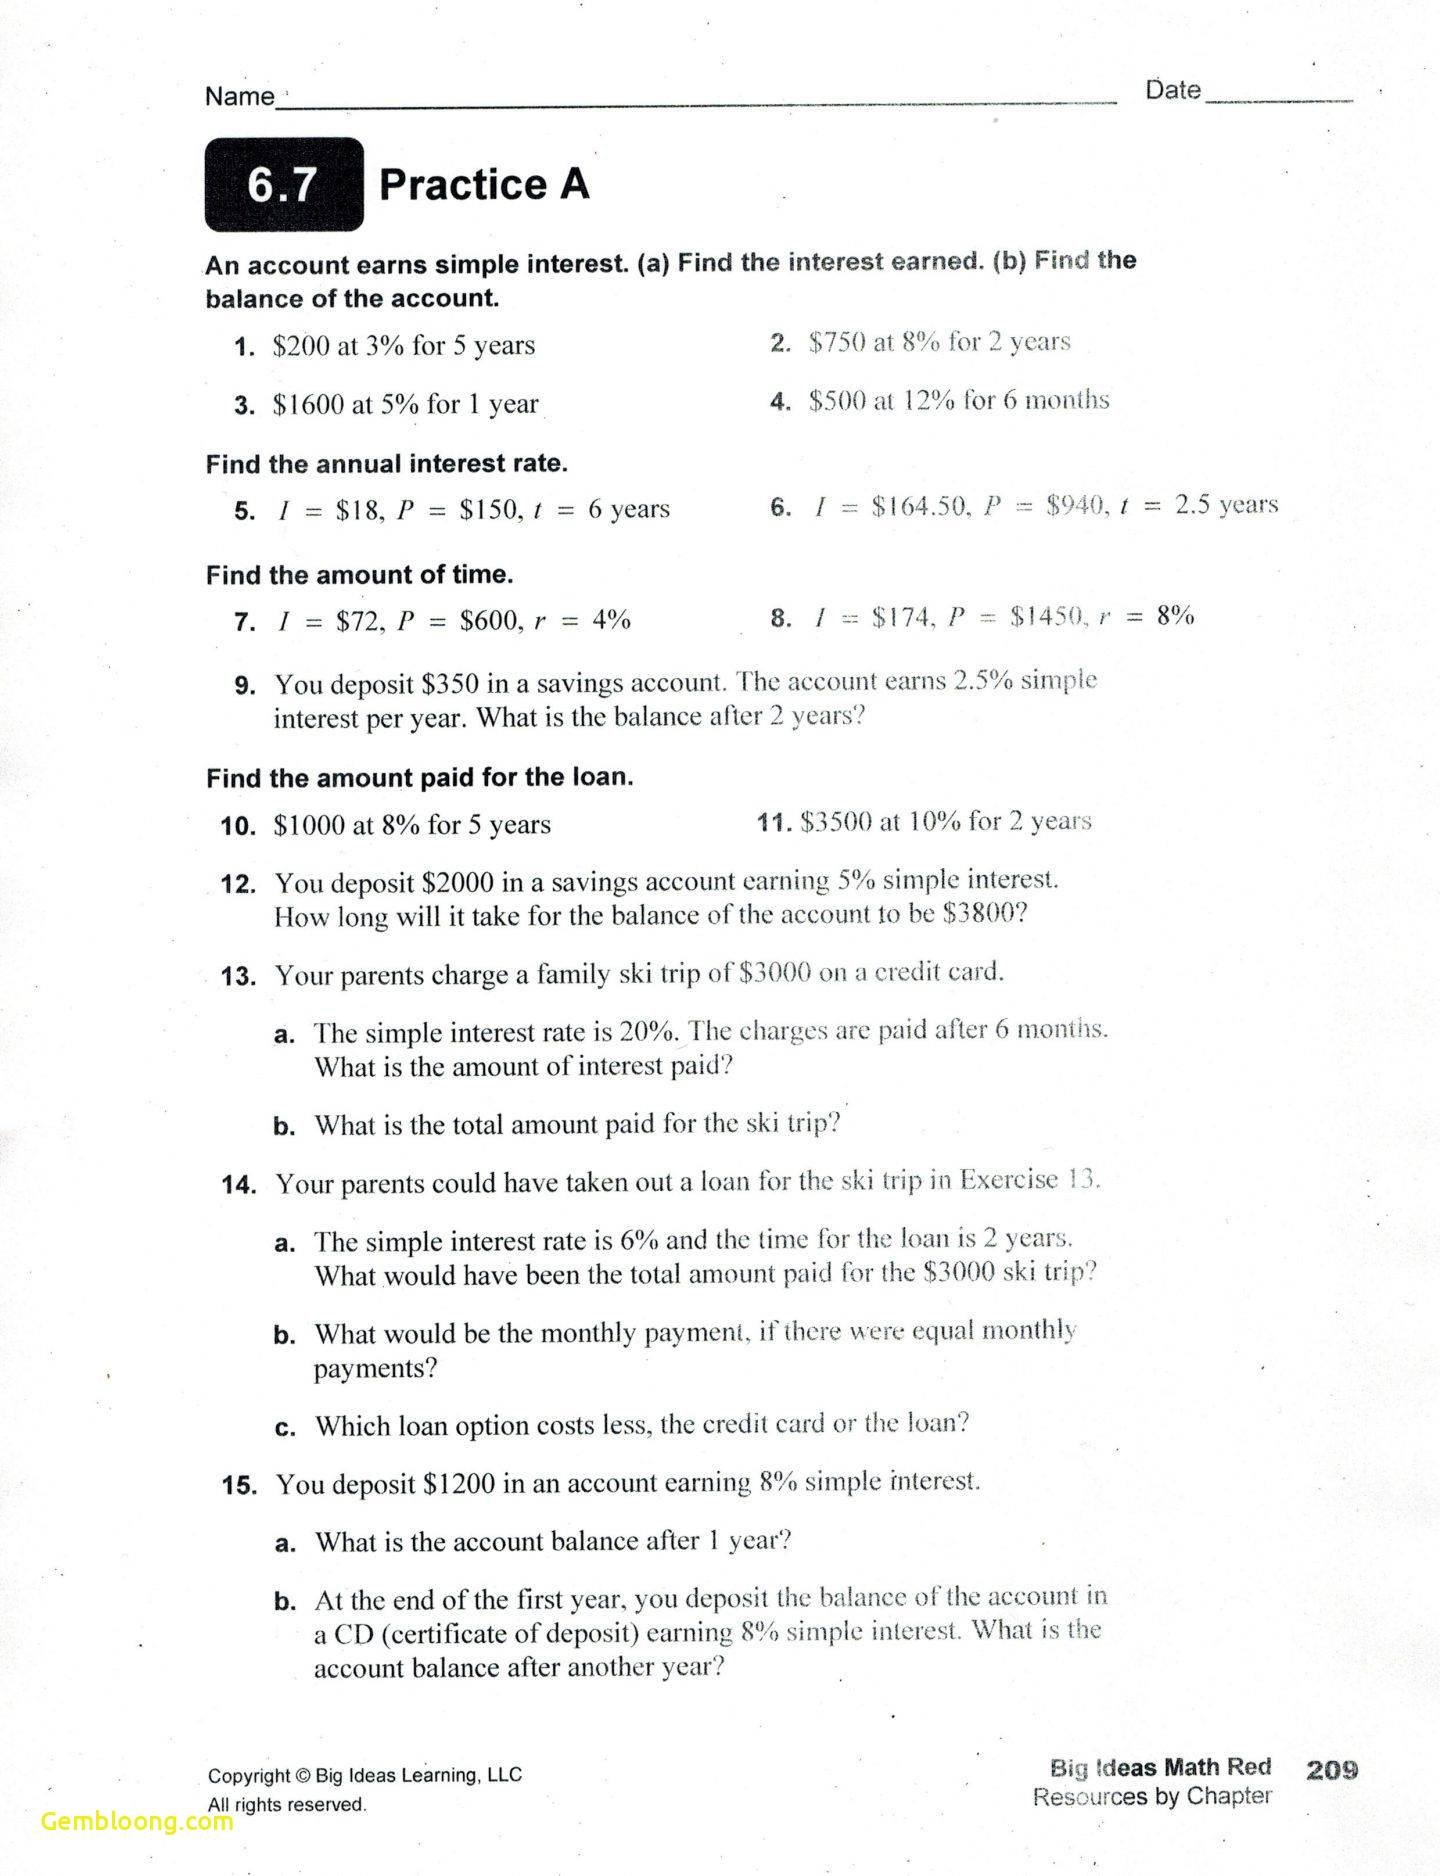 Compound Interest And E Worksheet Answers  Cramerforcongress Also Simple And Compound Interest Worksheet Answers